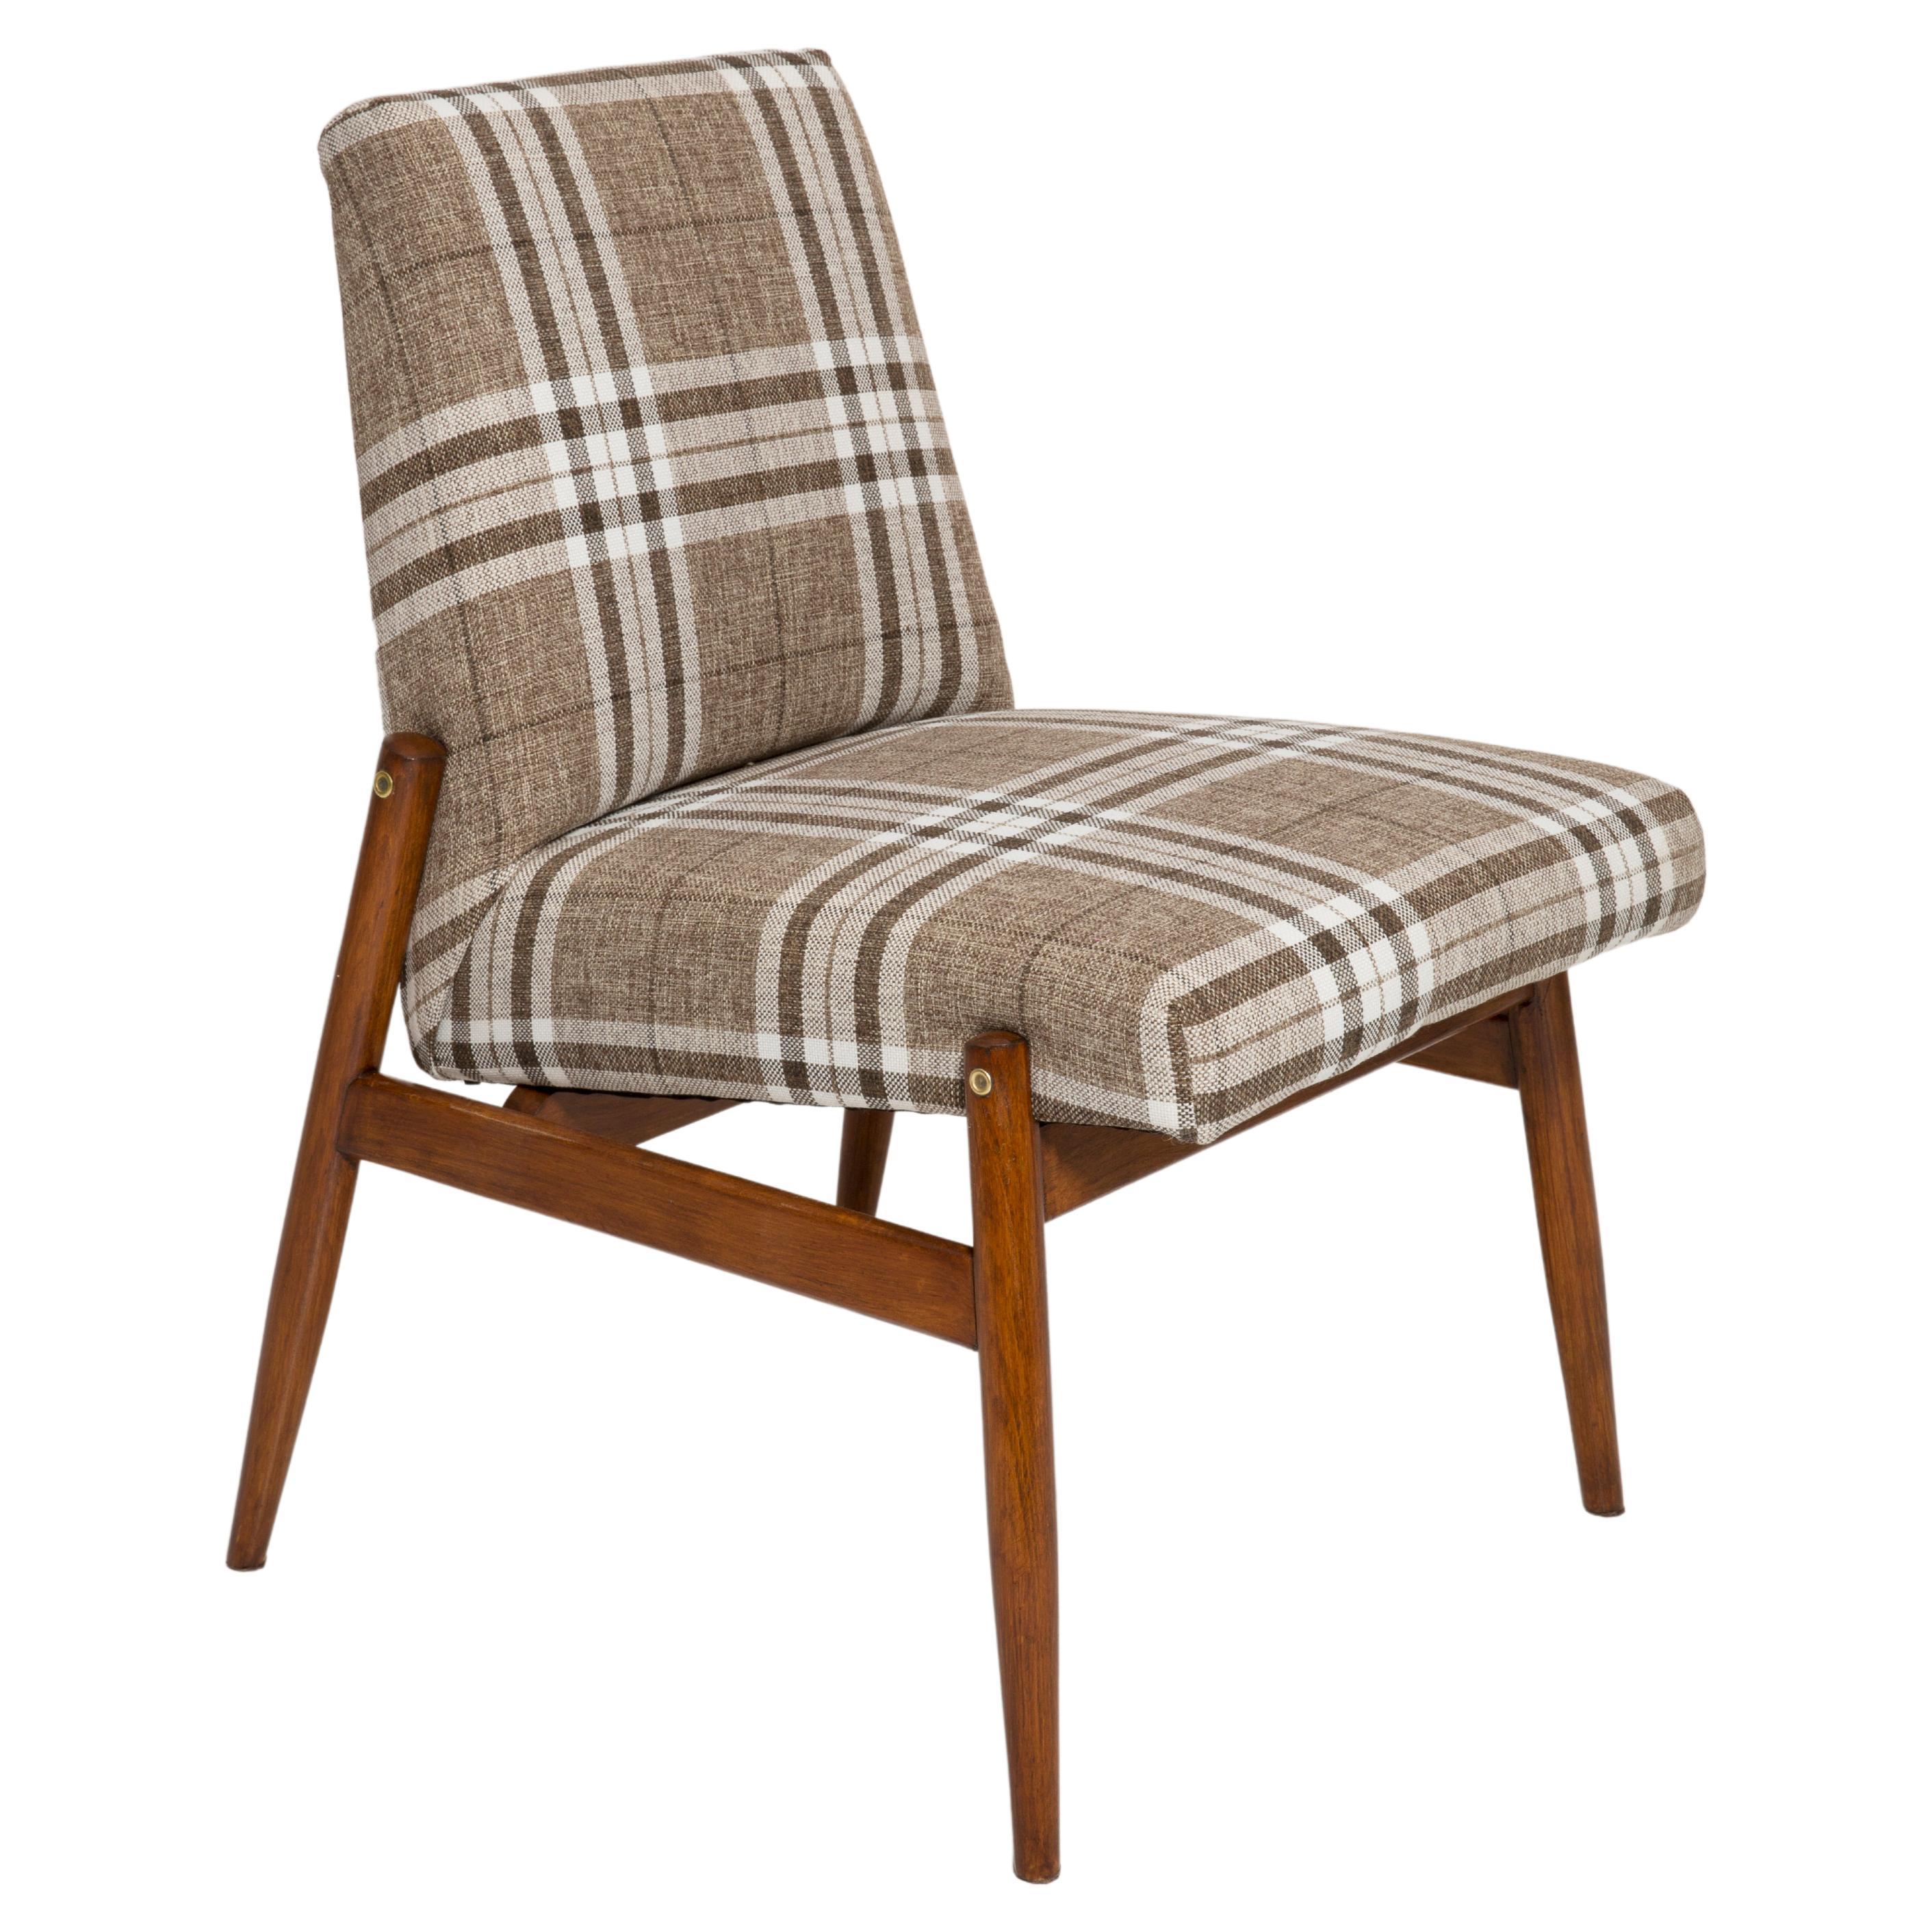 20th Century Beige Checkered Fabric Armchair, 300-227 Type, Europe, 1960s For Sale